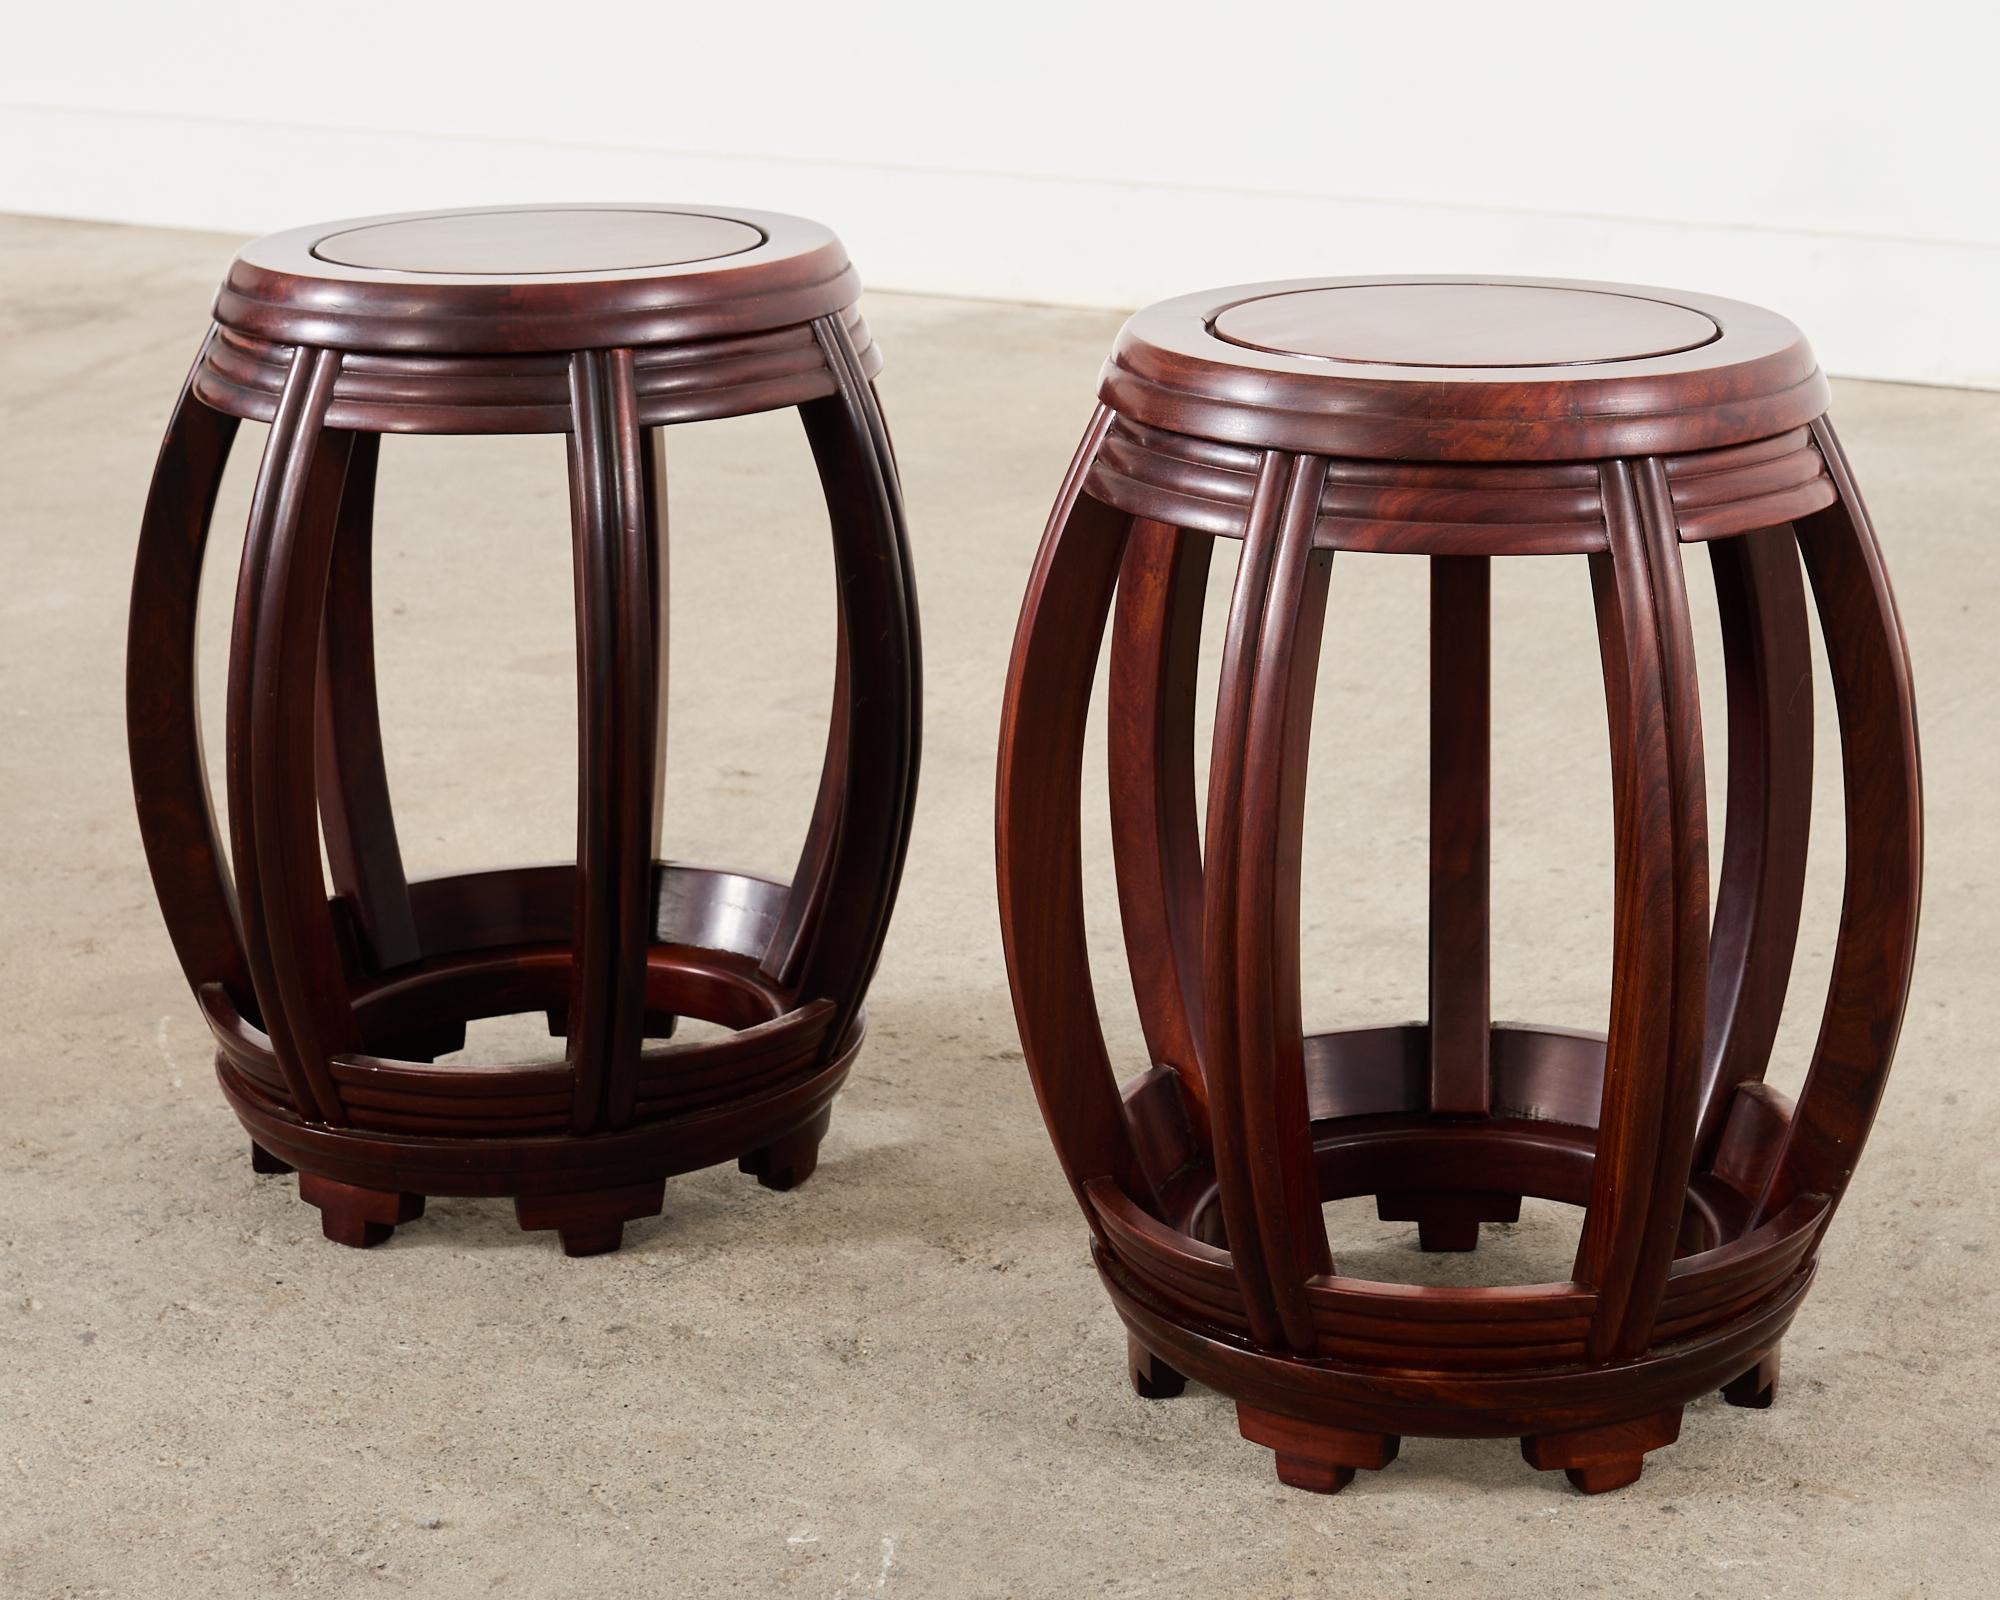 Pair of Chinese Export Hardwood Drum Stools or Drink Tables In Good Condition For Sale In Rio Vista, CA